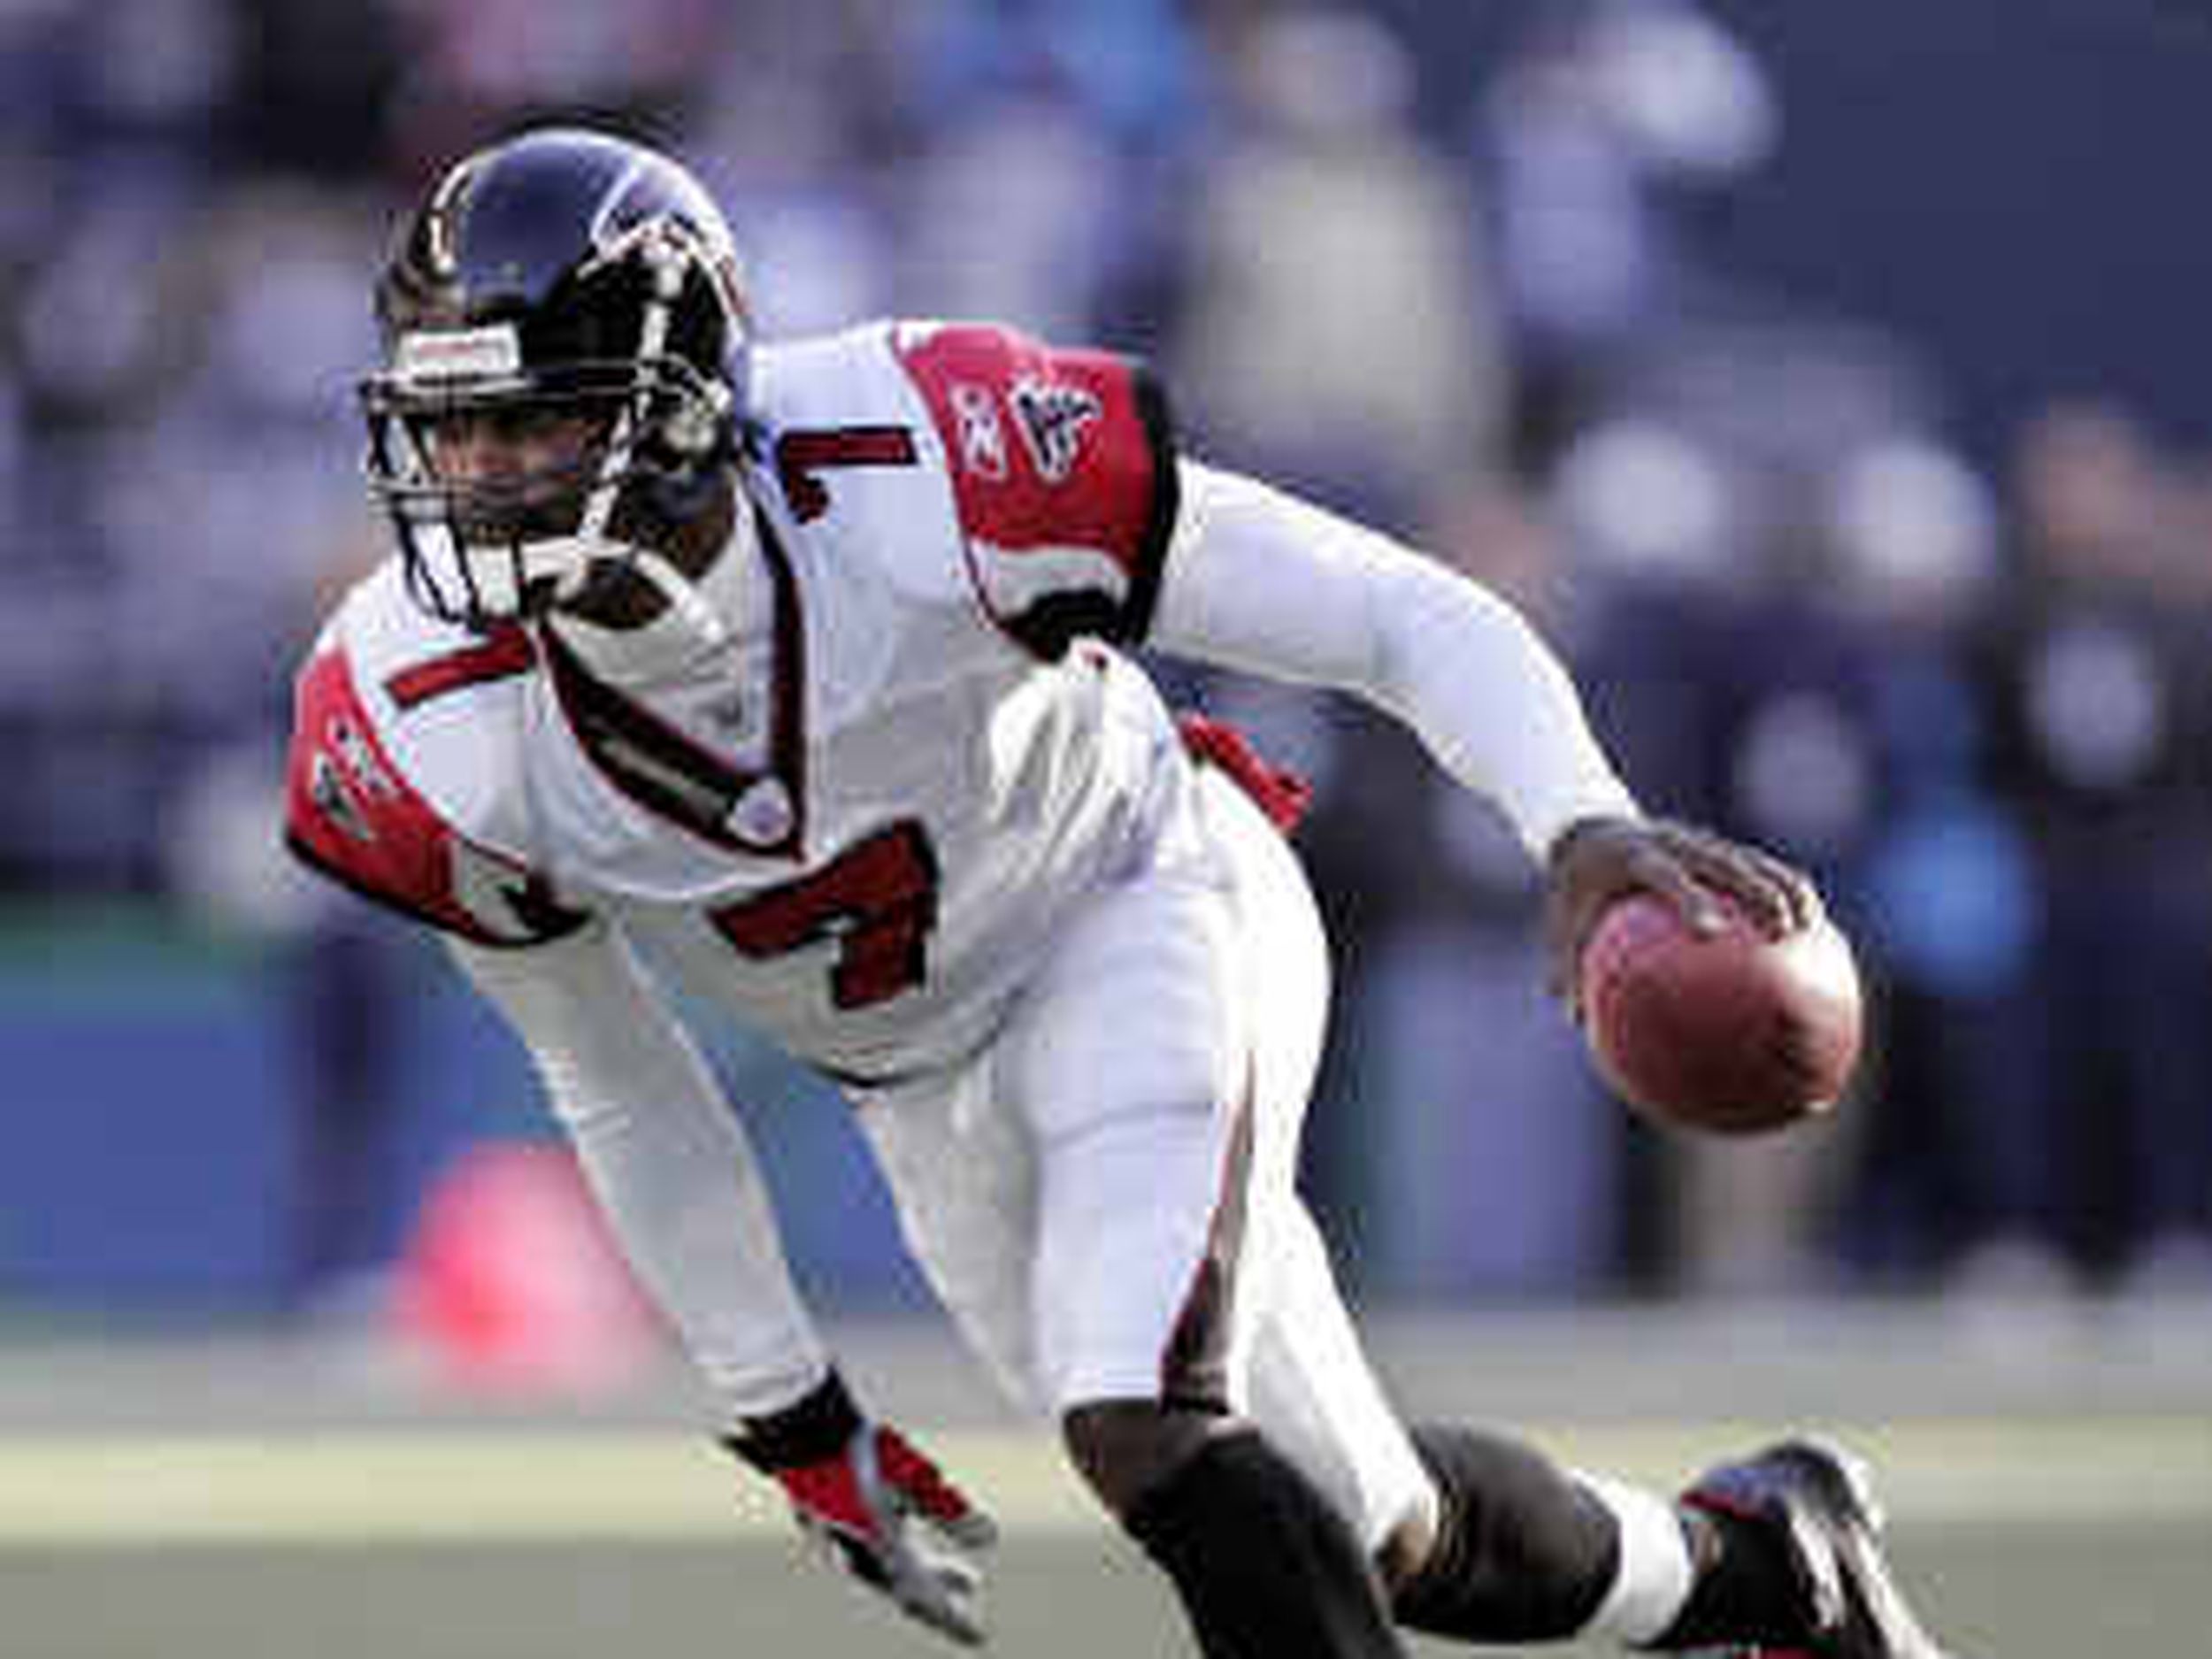 Michael Vick changes Twitter profile photo to him in Falcons jersey